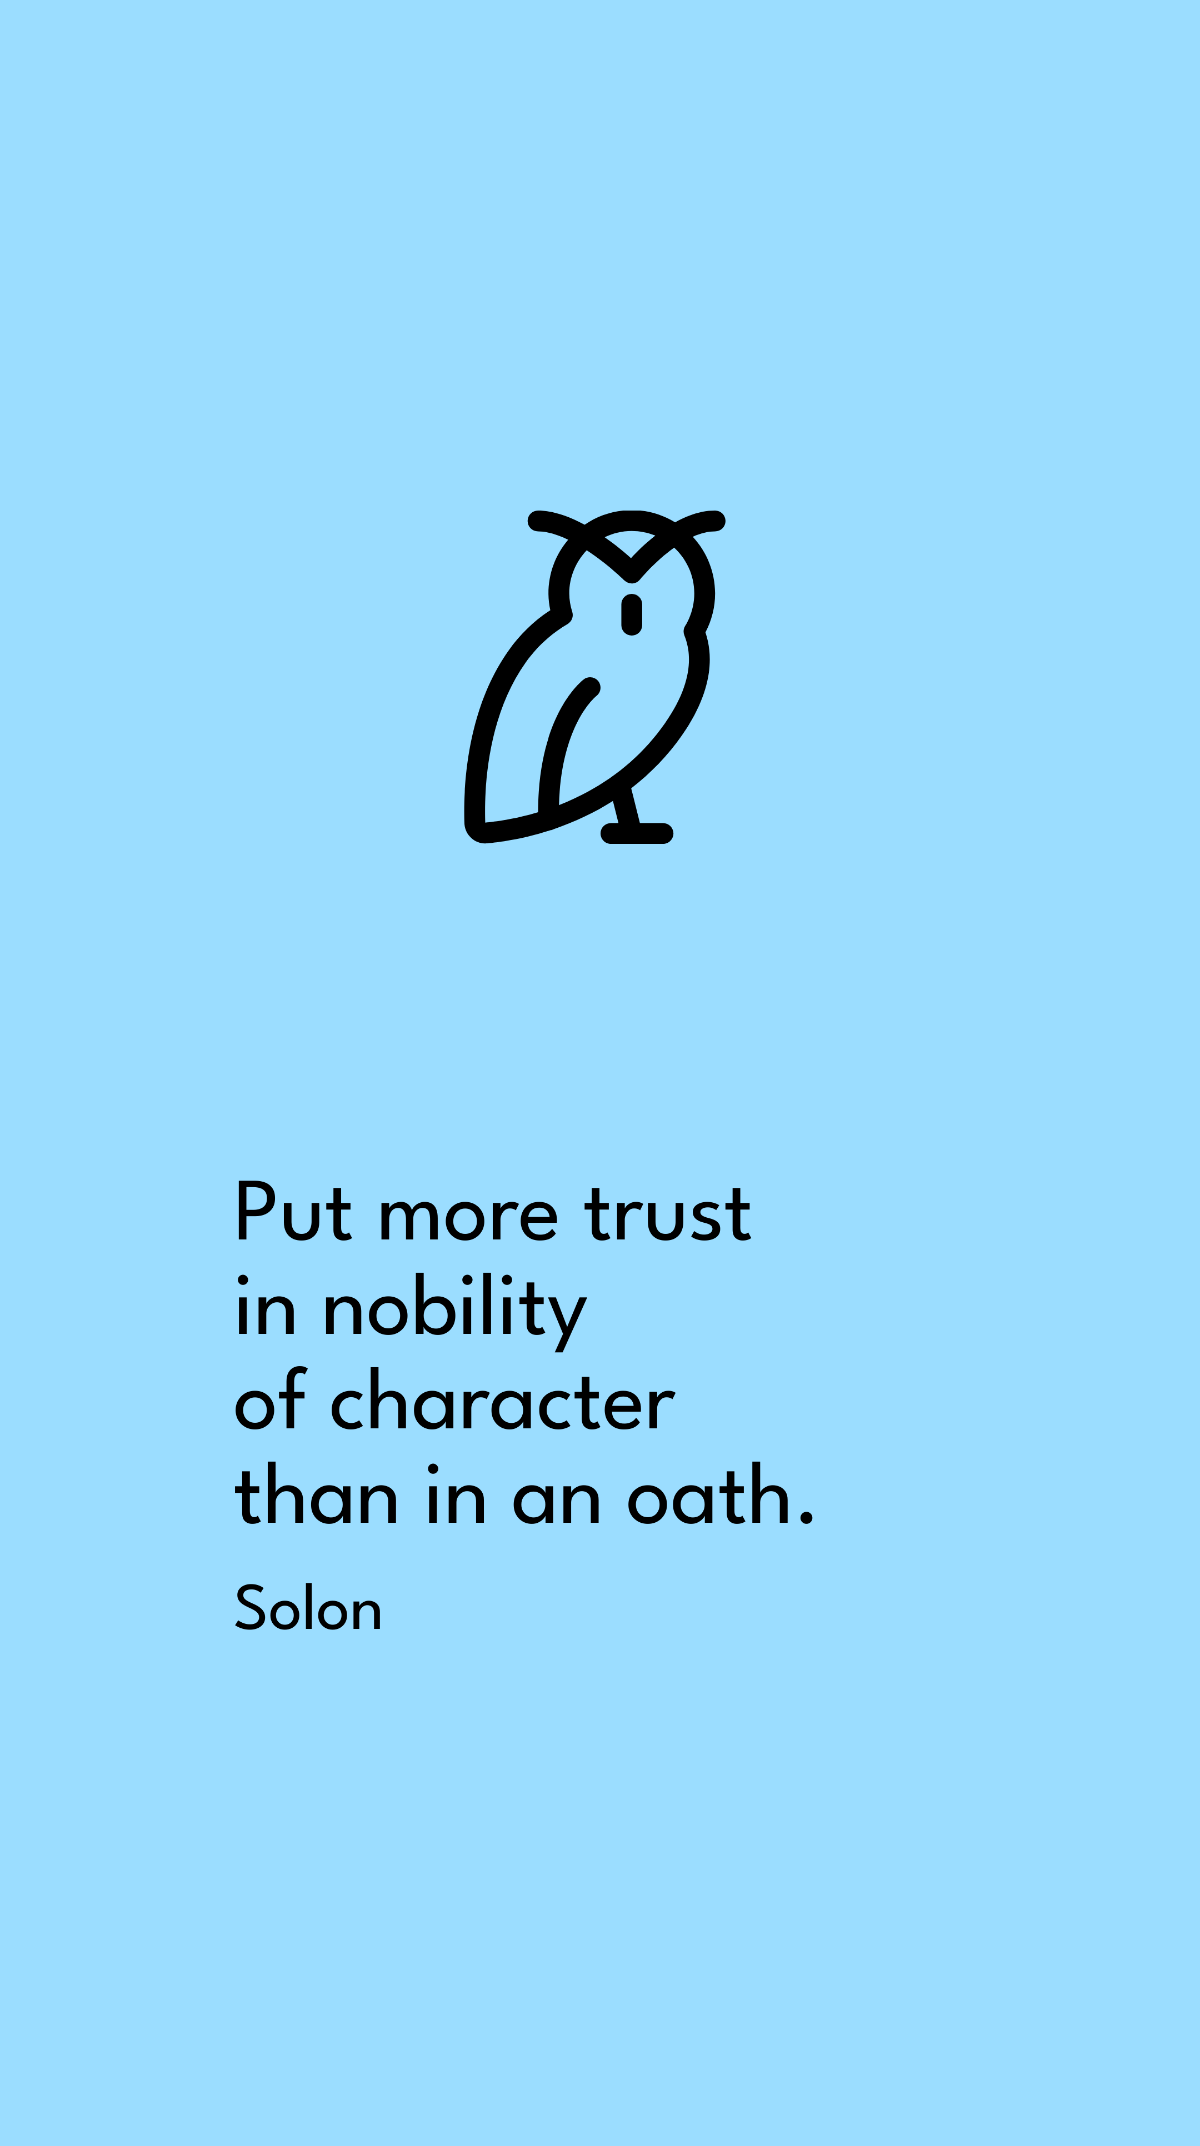 Free Solon - Put more trust in nobility of character than in an oath. Template